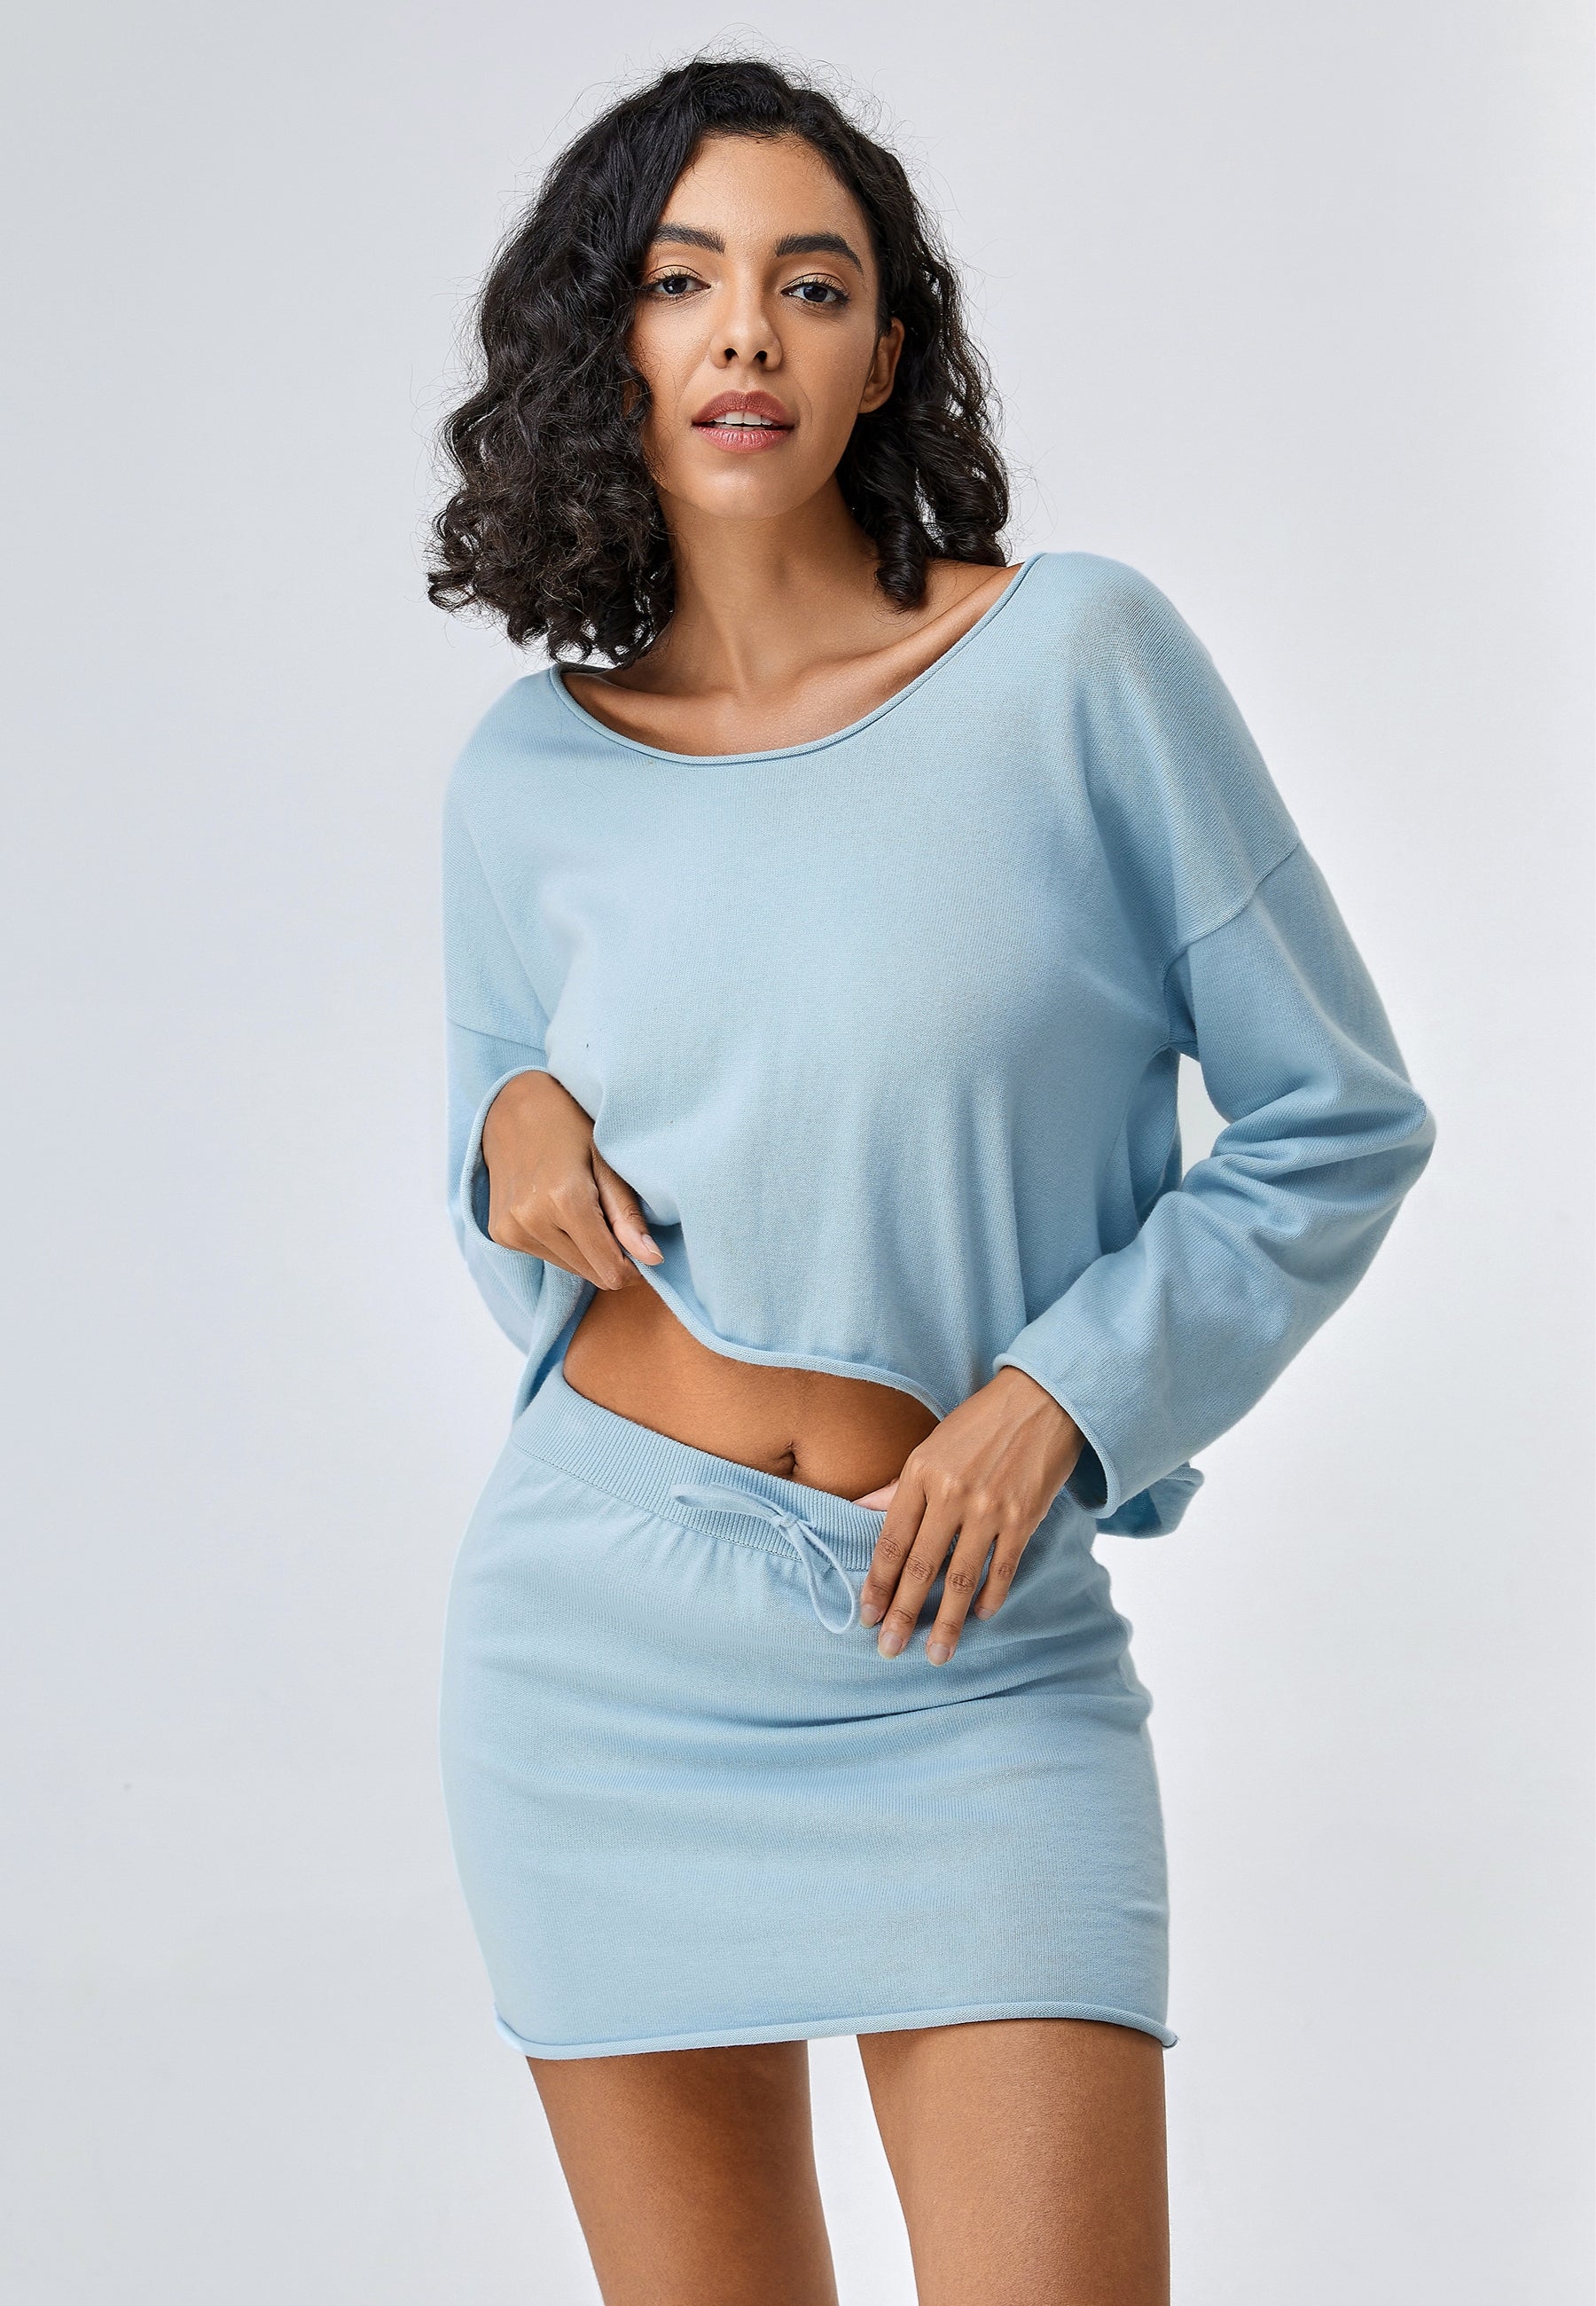 Women's Off-The-Shoulder Top & Mini Skirt Two-Piece Leisure Set